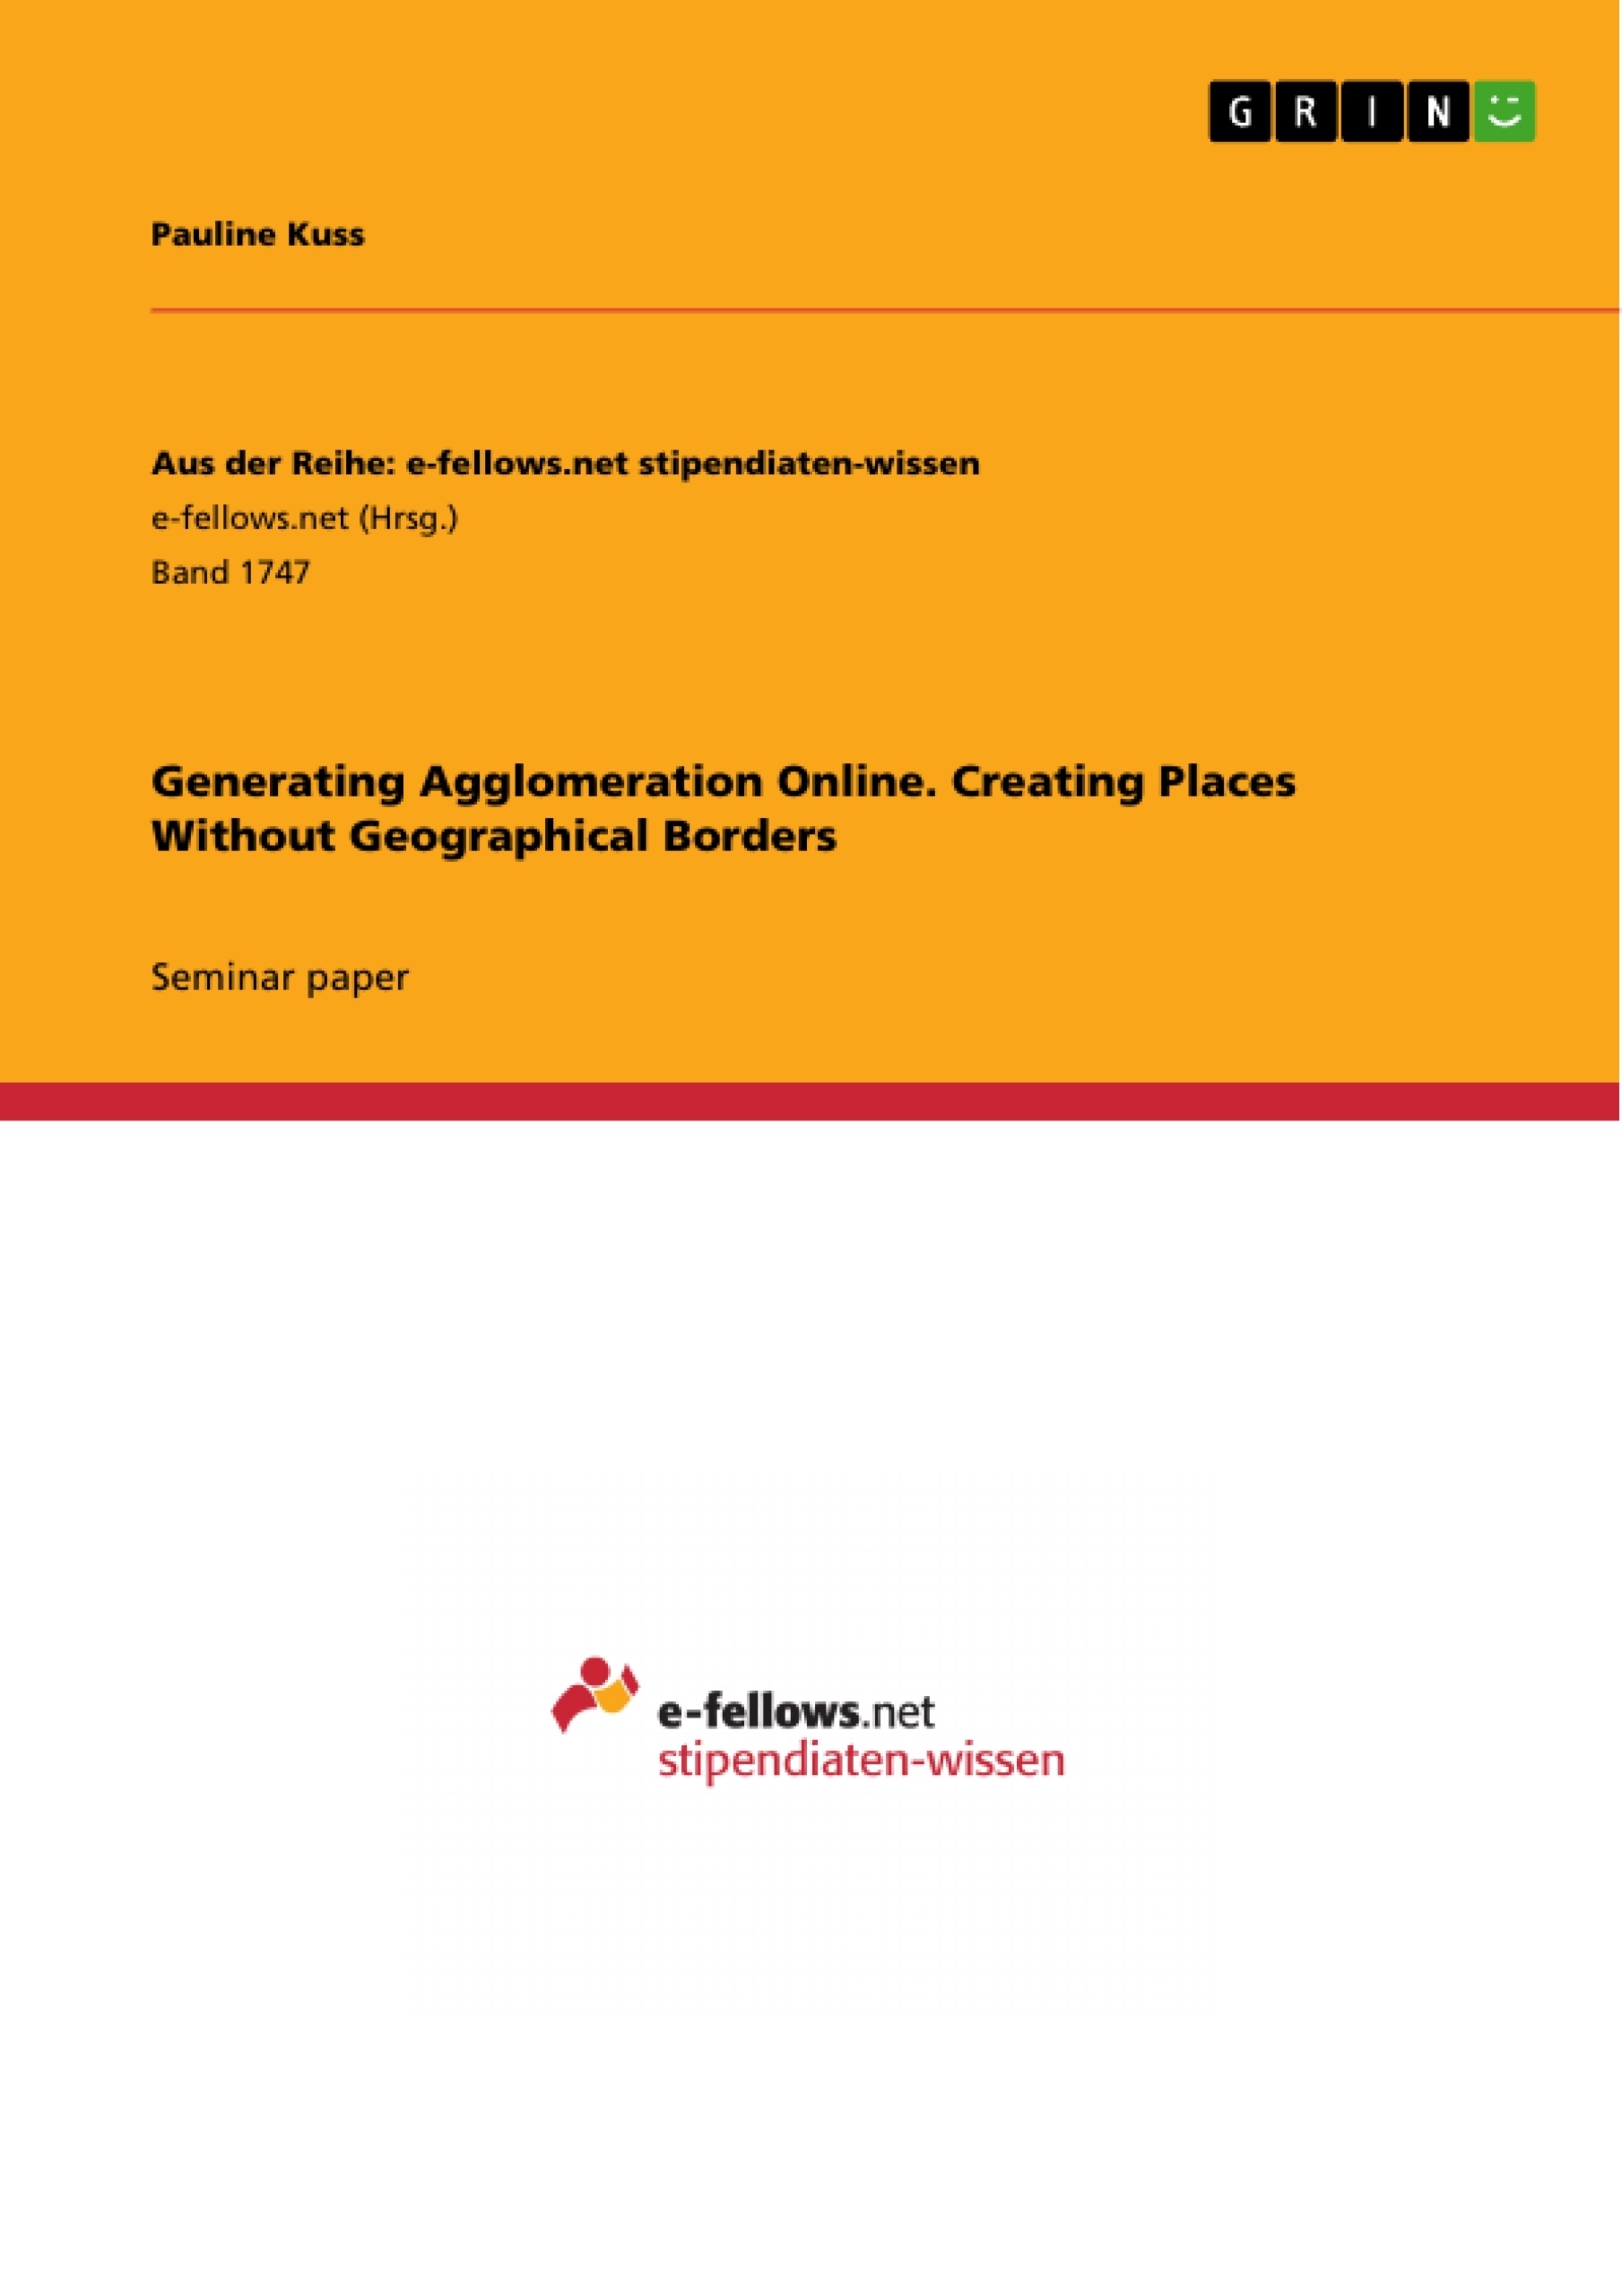 Title: Generating Agglomeration Online. Creating Places Without Geographical Borders